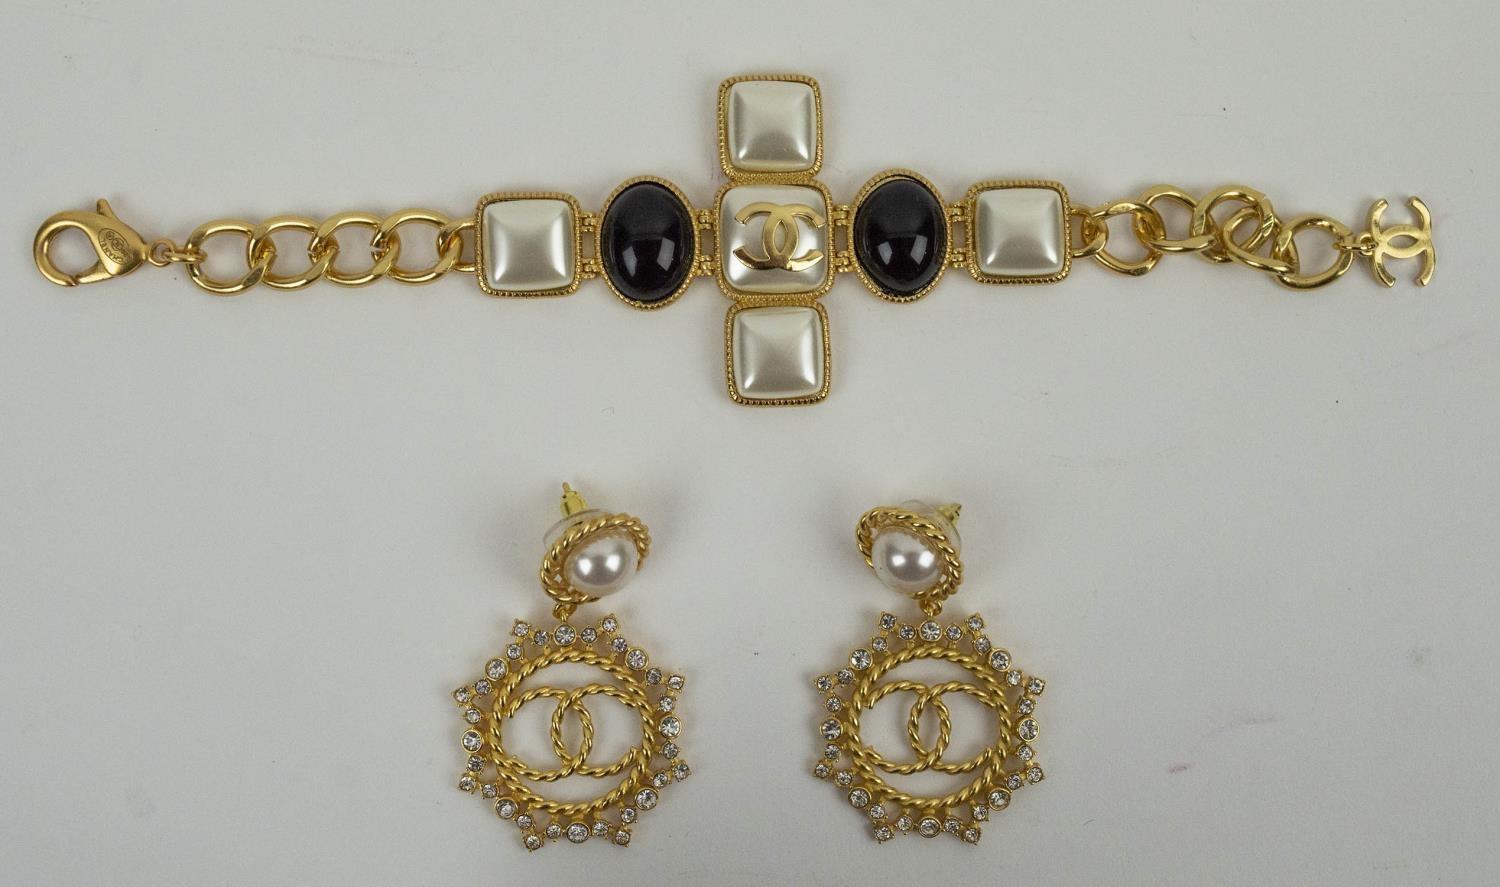 CHANEL BLACK CABOCHON SET, CC cross bracelet with a pair of faux pearl and crystal sett CC earrings.